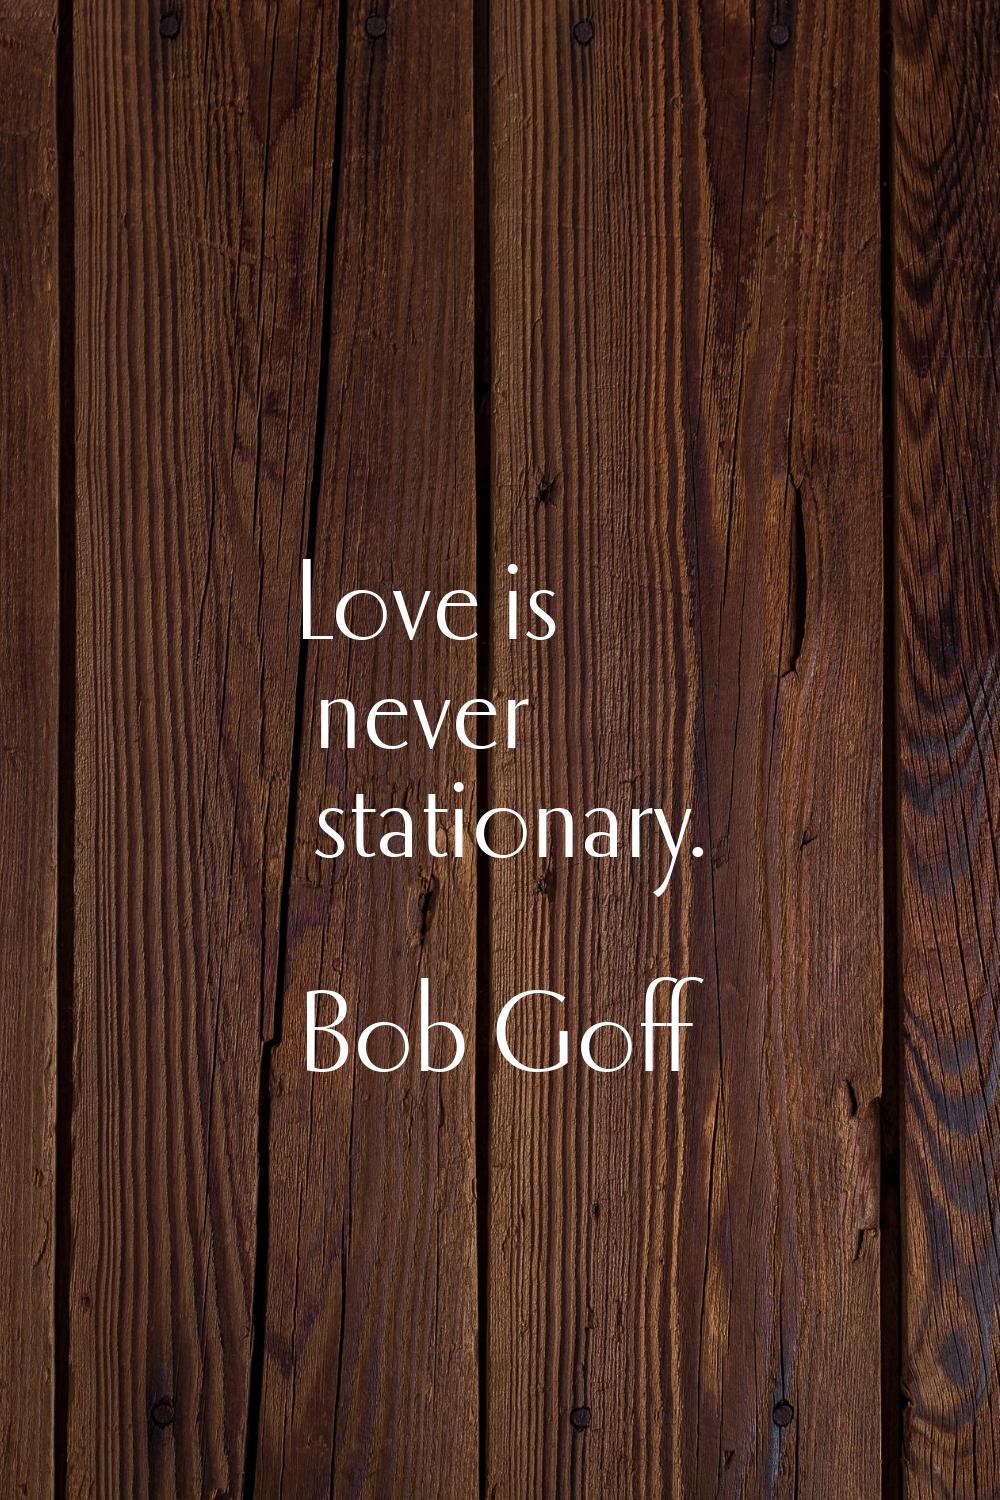 Love is never stationary.